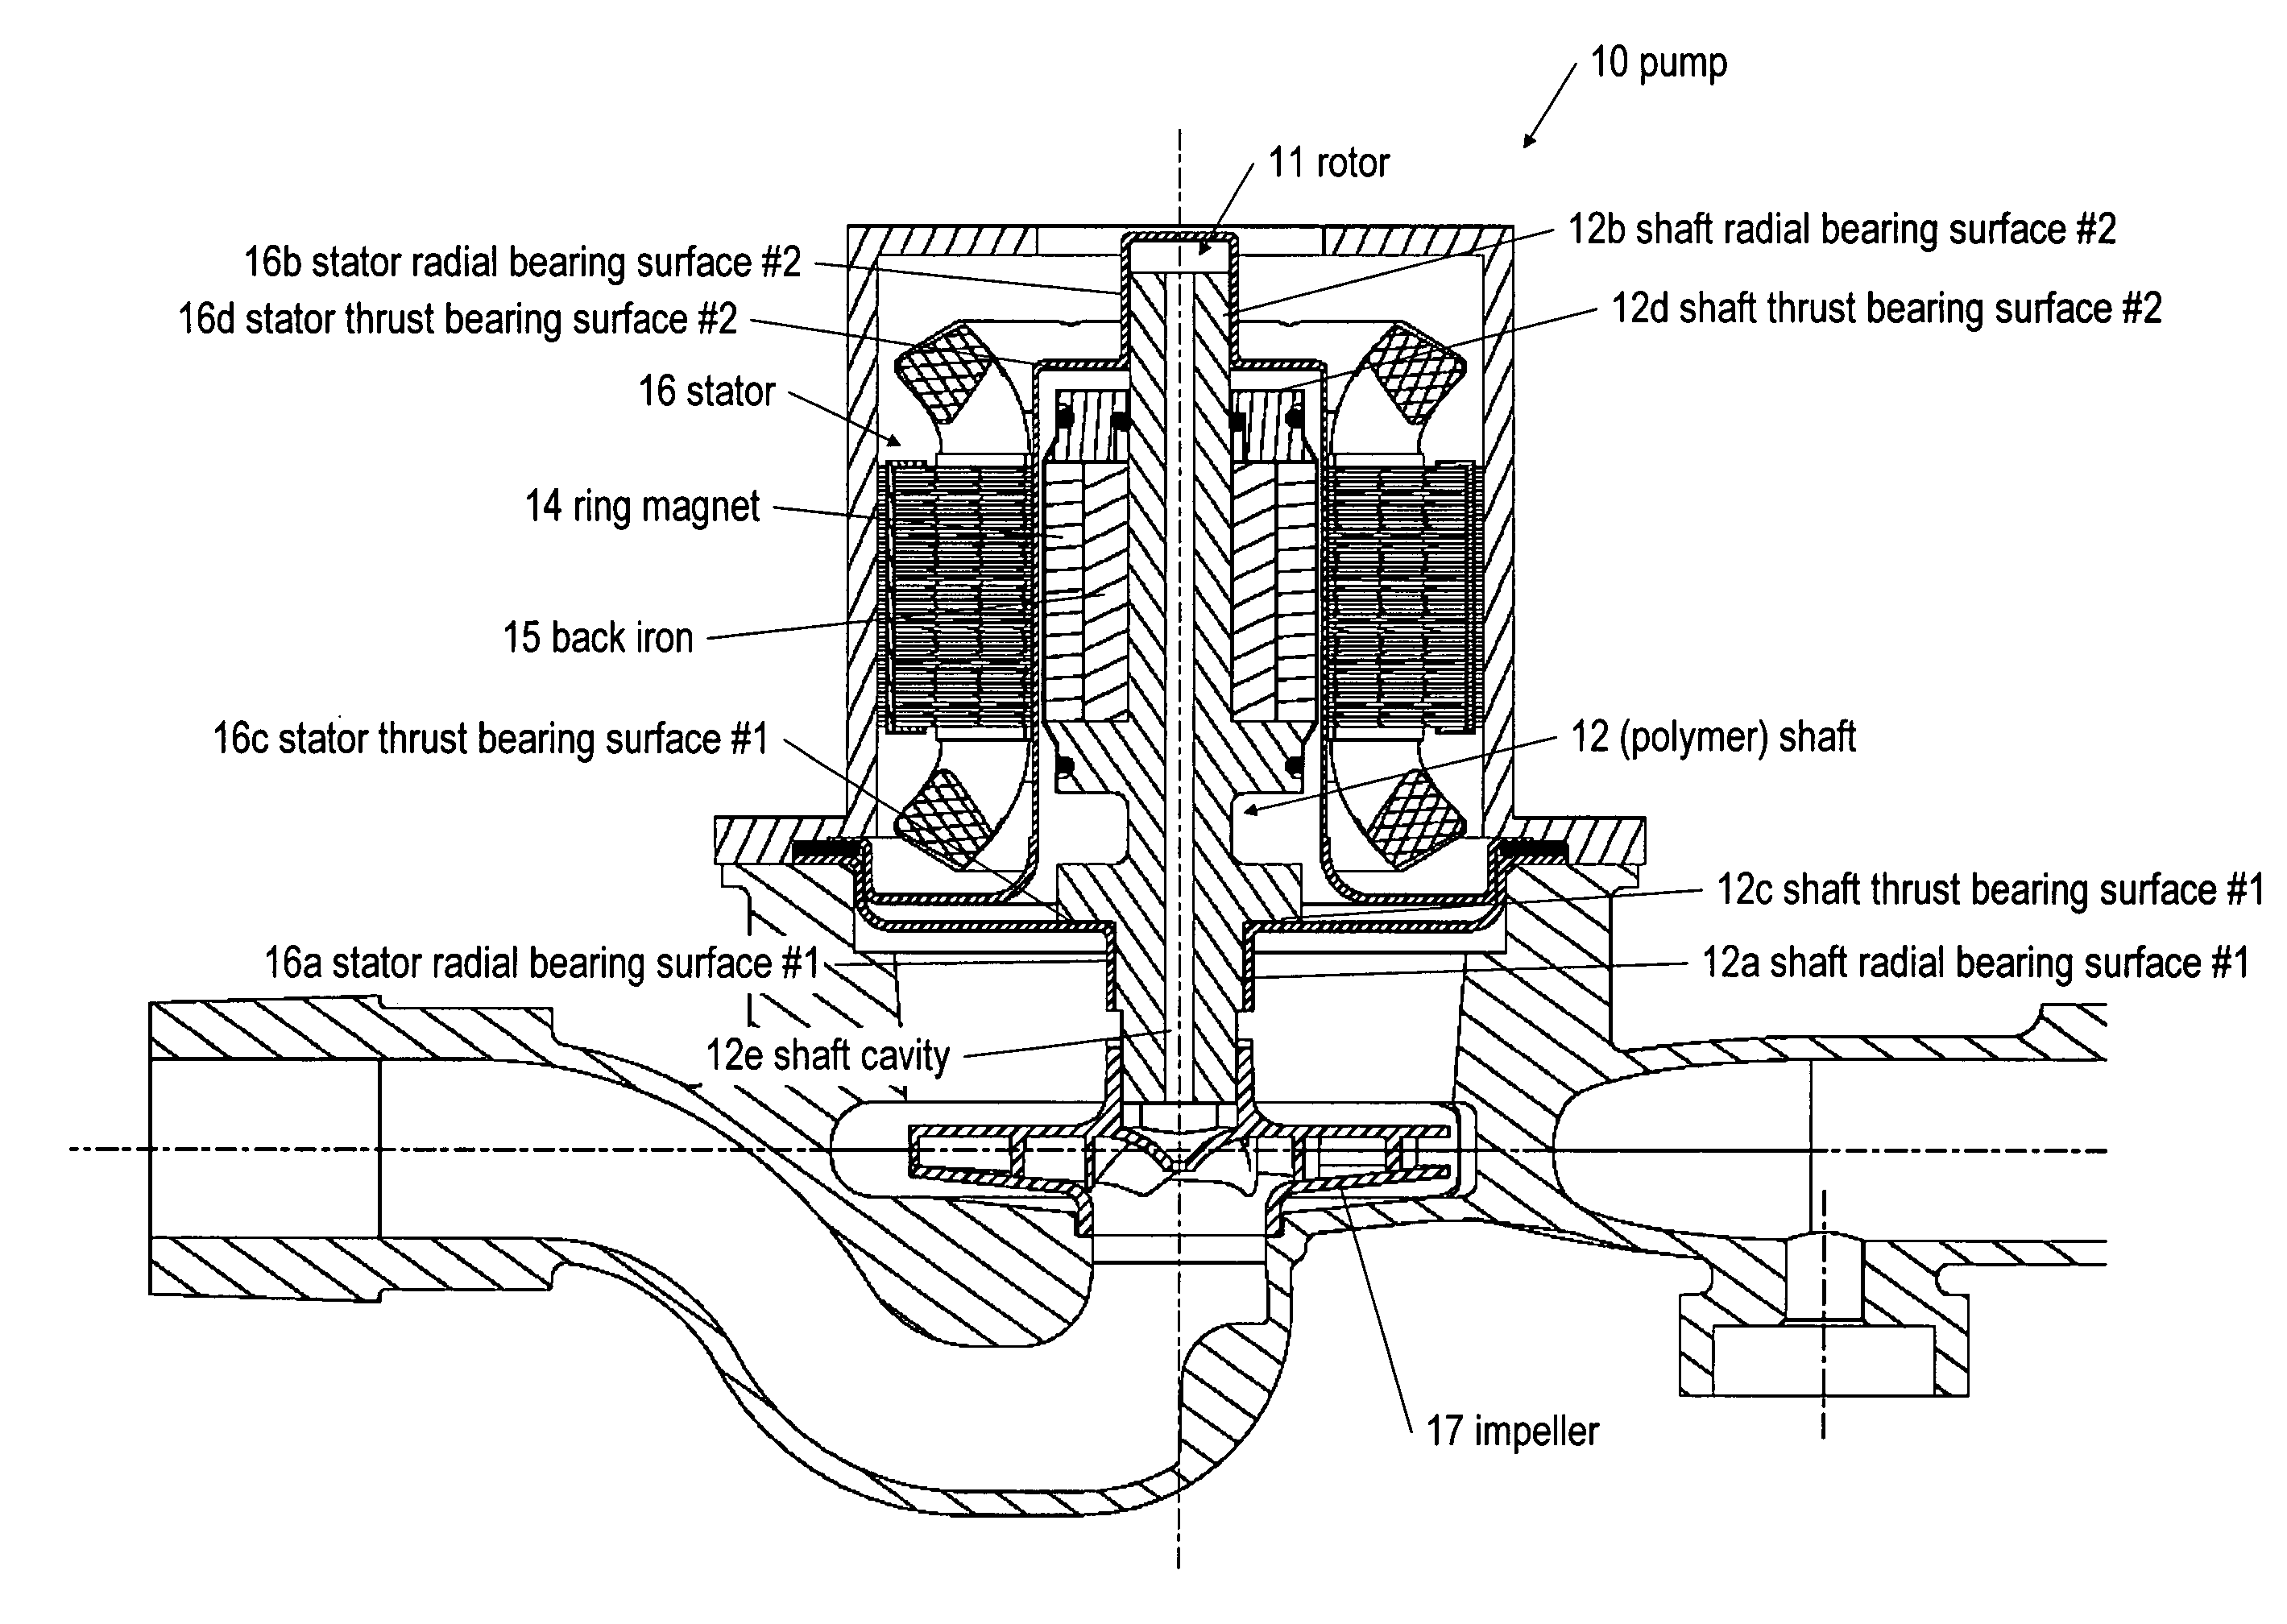 Rotating machine having a shaft including an integral bearing surface